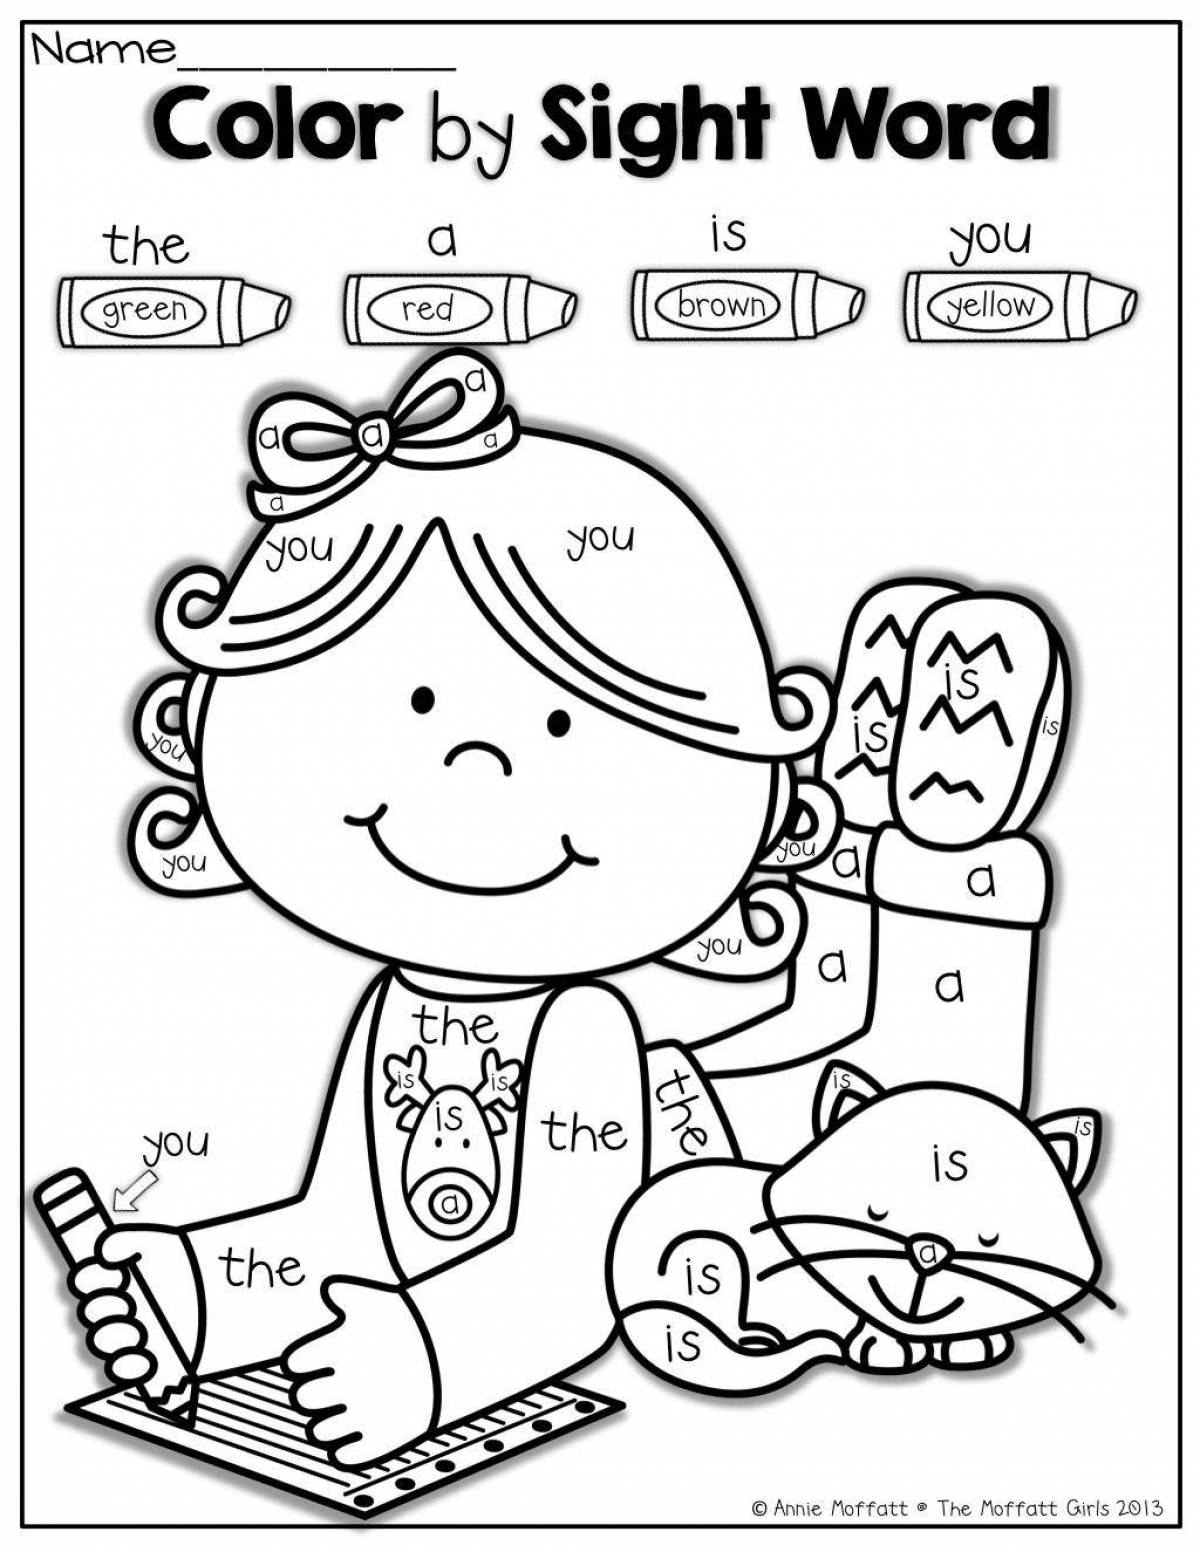 Creative coloring book for kids in english